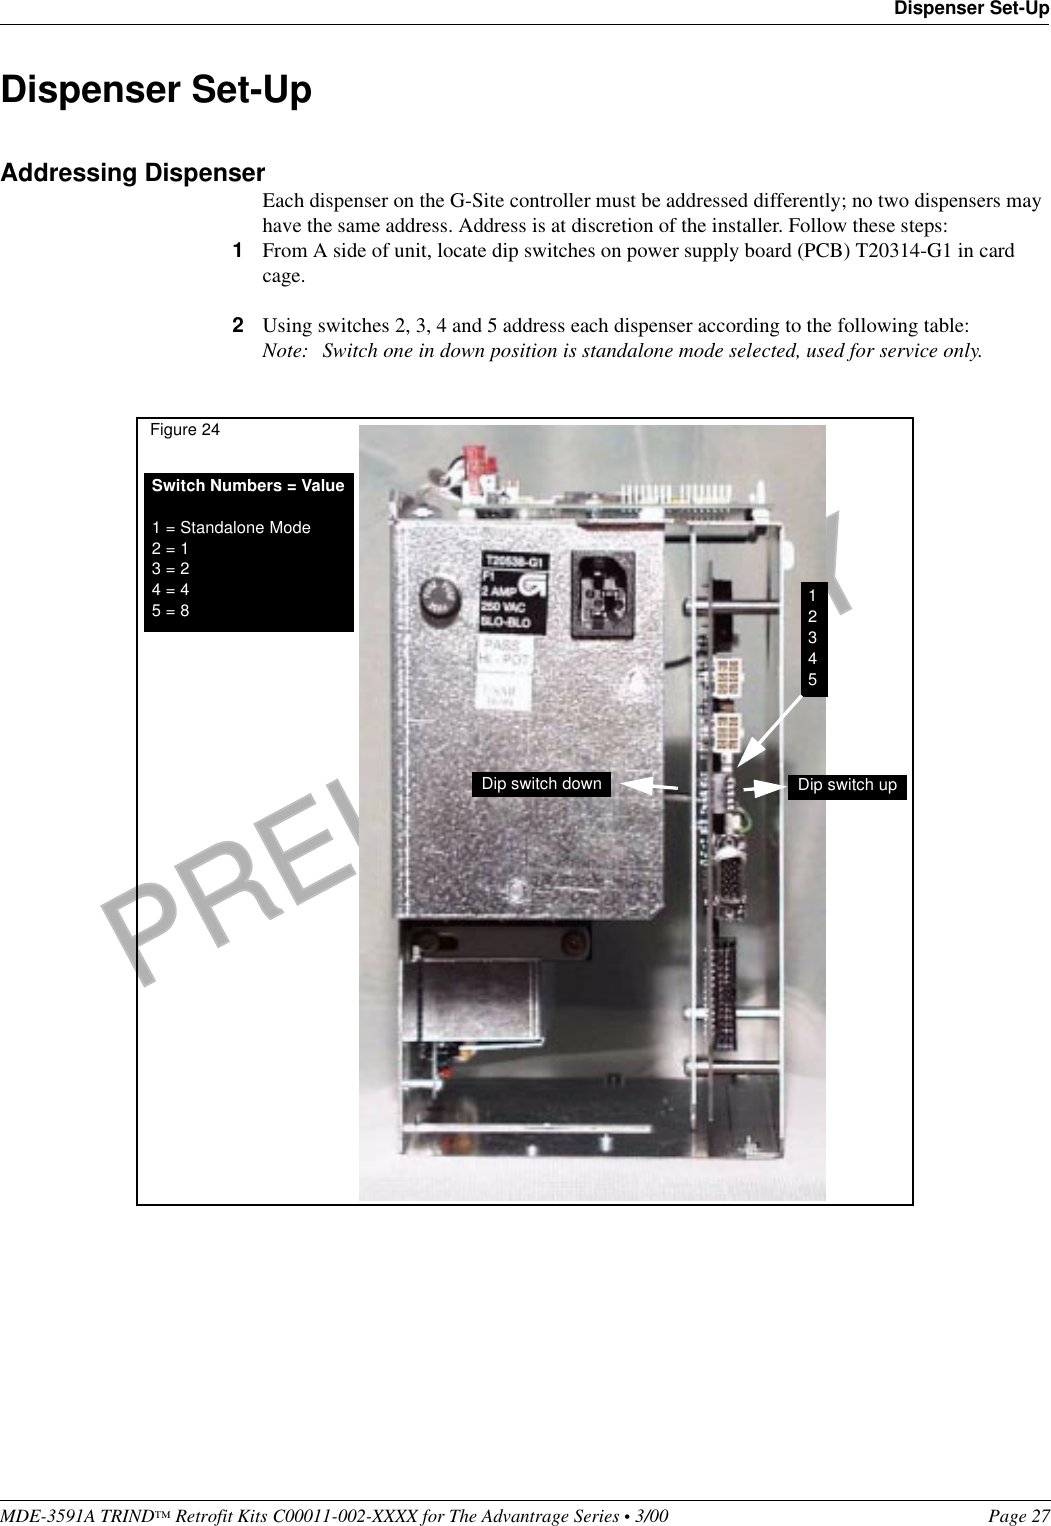 PRELIMINARYMDE-3591A TRIND™ Retrofit Kits C00011-002-XXXX for The Advantrage Series • 3/00  Page 27Dispenser Set-UpDispenser Set-UpAddressing DispenserEach dispenser on the G-Site controller must be addressed differently; no two dispensers may have the same address. Address is at discretion of the installer. Follow these steps:1From A side of unit, locate dip switches on power supply board (PCB) T20314-G1 in card cage.2Using switches 2, 3, 4 and 5 address each dispenser according to the following table:Note: Switch one in down position is standalone mode selected, used for service only.Switch Numbers = Value1 = Standalone Mode2 = 13 = 24 = 45 = 8 12345Dip switch down Dip switch upFigure 24